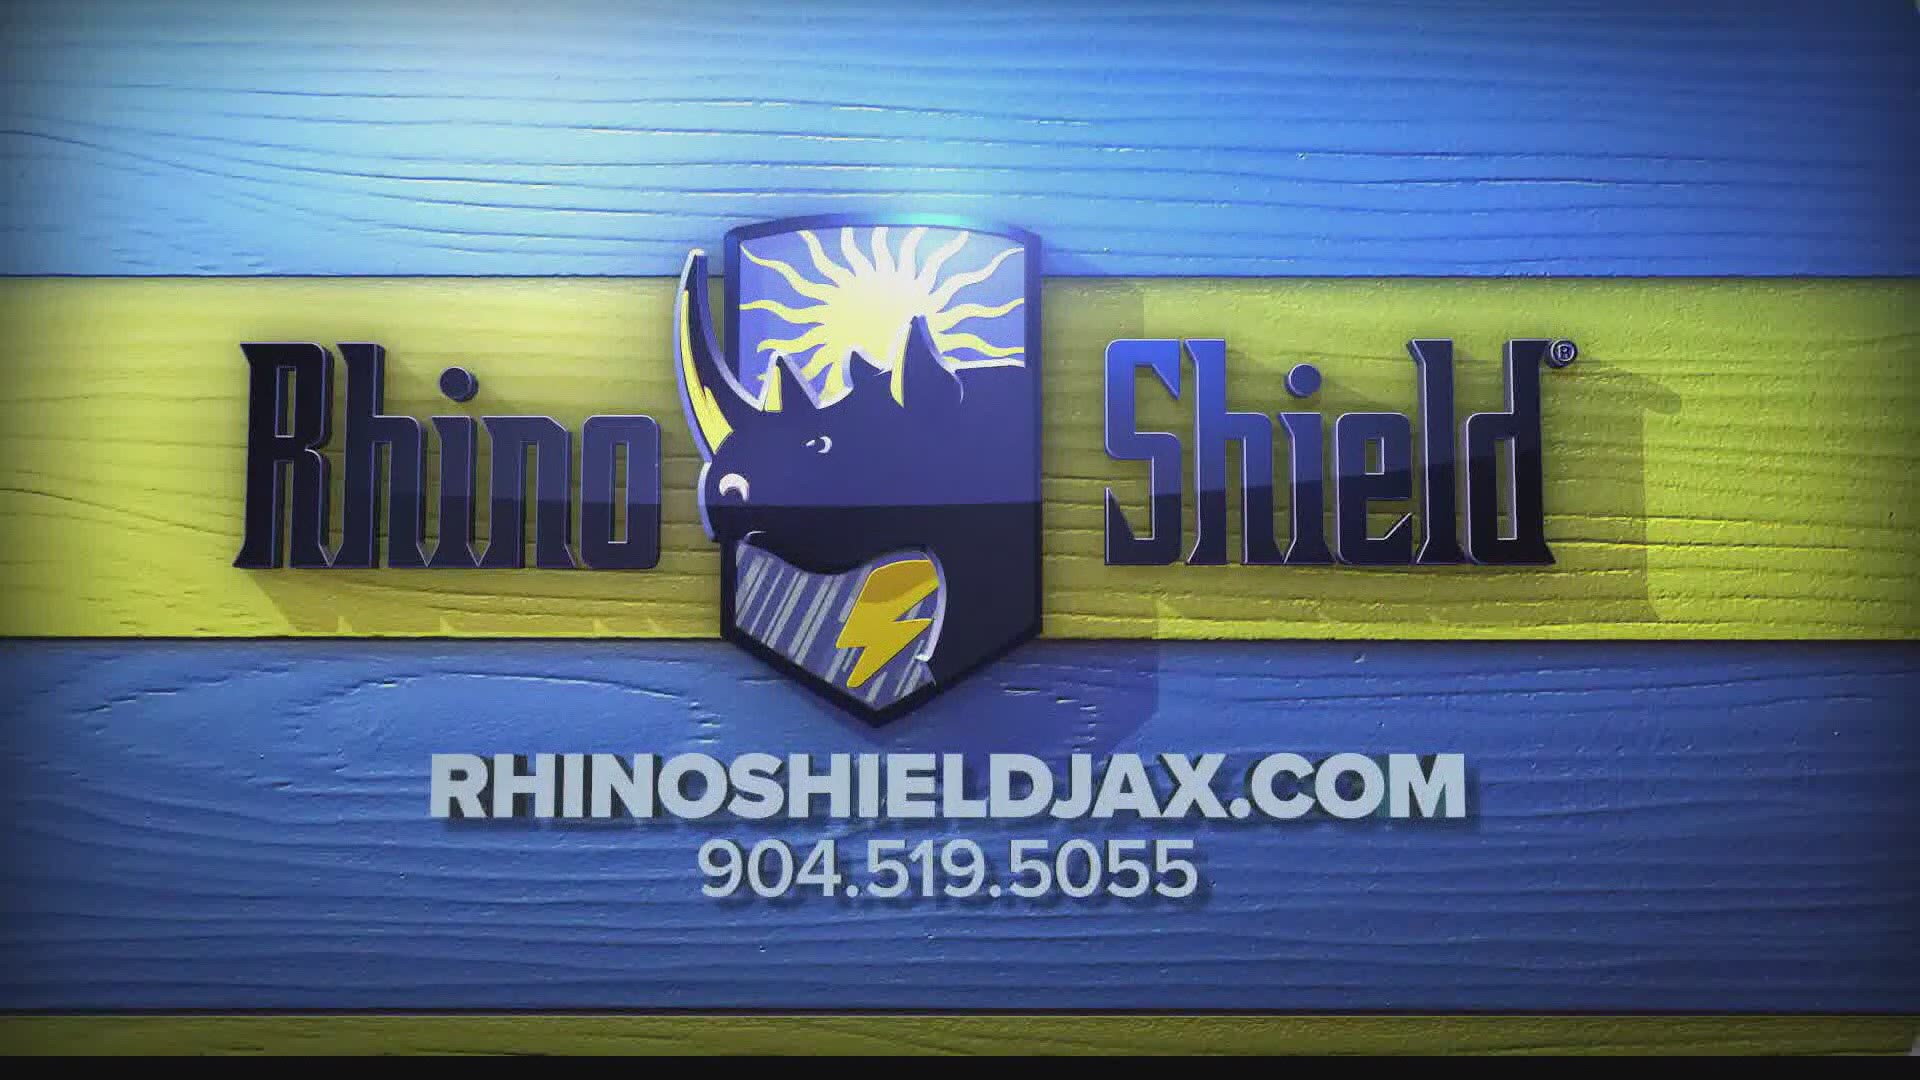 Are you looking to upgrade the look of your home or business? Check out Rhino Shield.